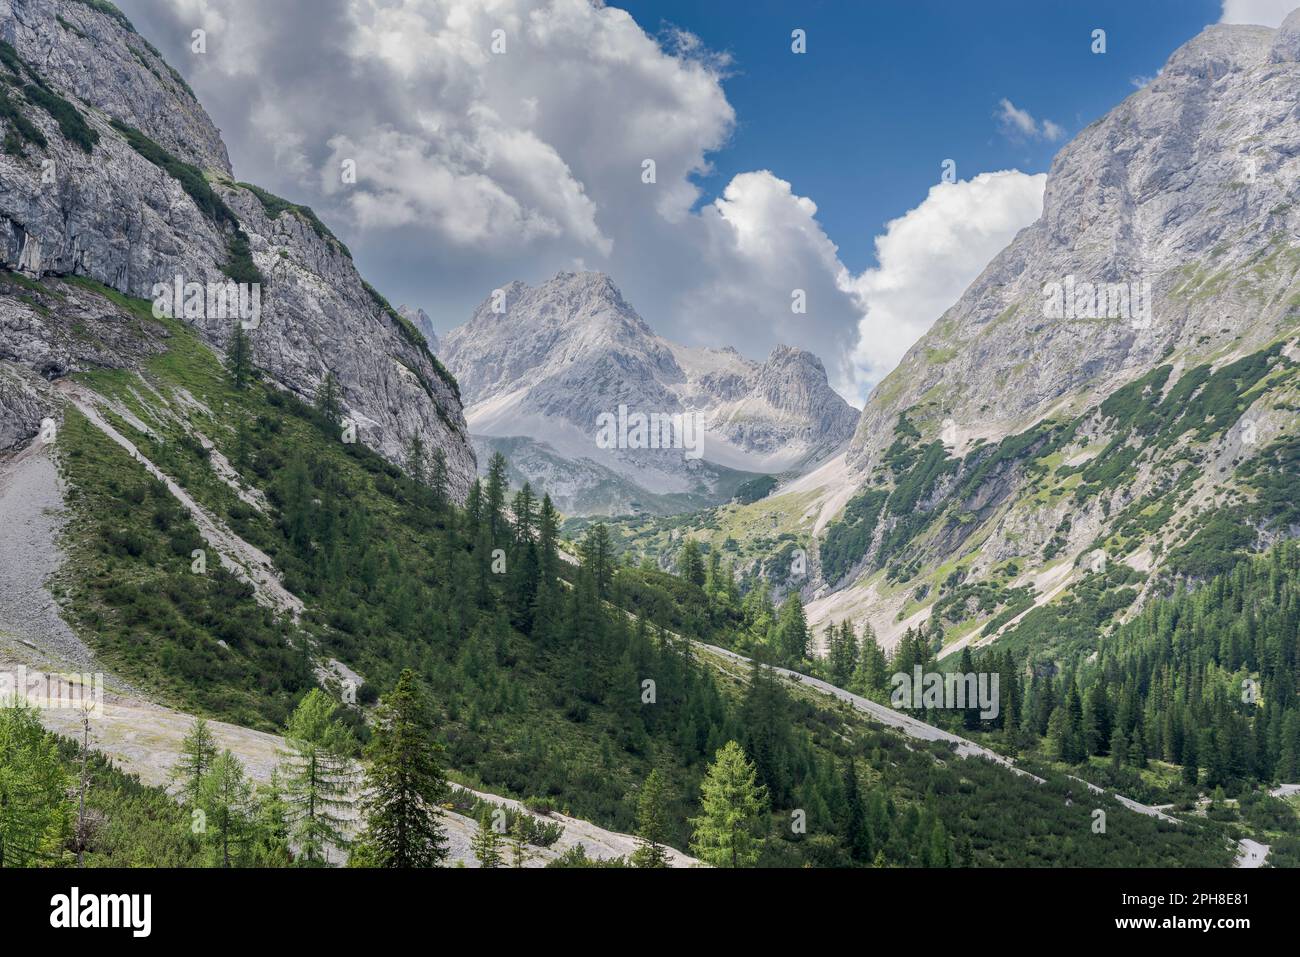 Alpine landscape in the Mieming Range, State of Tyrol, Austria. Stock Photo